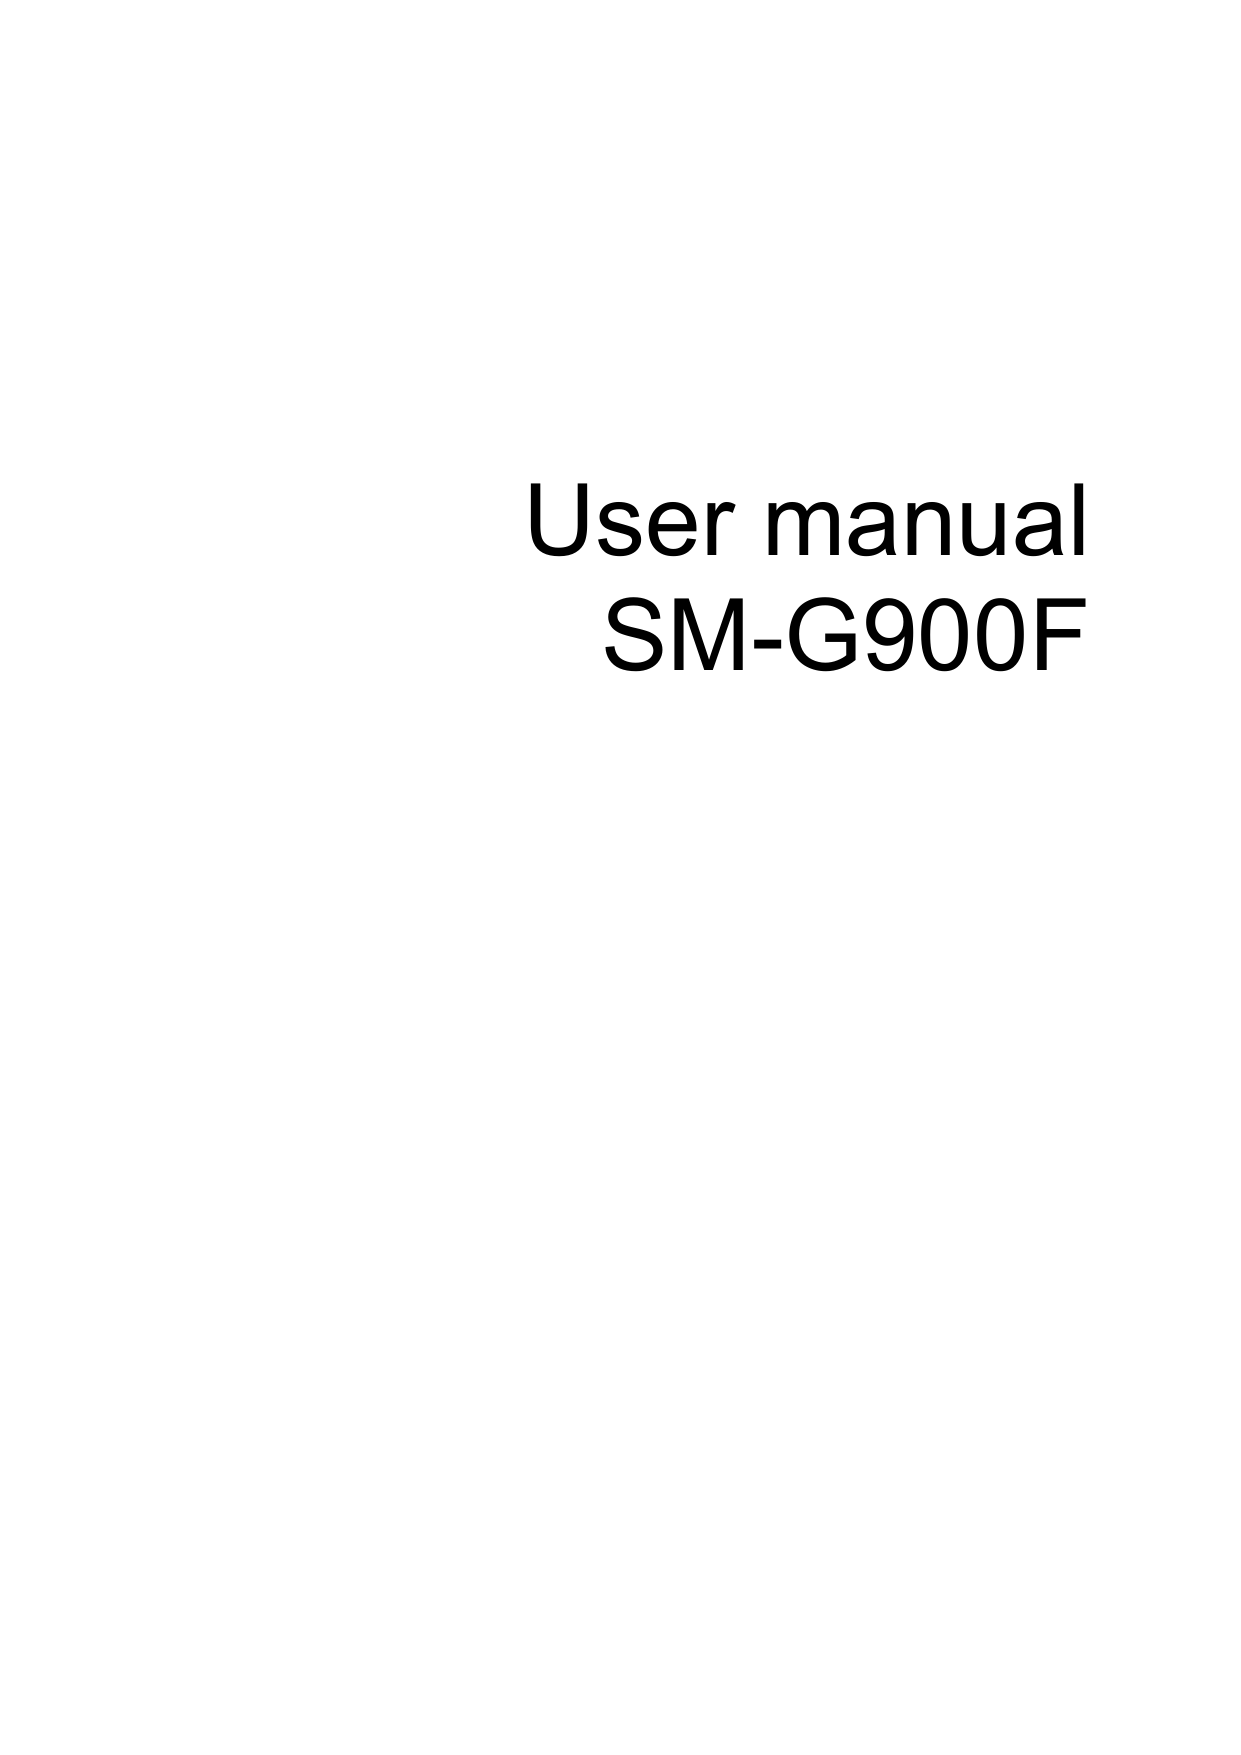 User manual SM-G900F This device is capable of operating in 802.11a/n/ac mode. For 802.11a/n/ac devices operating in the frequency range of 5.15 - 5.25 GHz, they are restricted to indoor operations only to reduce any potential harmful interference for Mobile Satellite Services (MSS) in the US. WIFI Access Points that are capable of allowing your device to operate in 802.11a/n/ac mode (5.15 - 5.25 GHz band) are optimized for indoor use only. If your WIFI network is capable of operating in this mode, please restrict your WIFI use indoors to not violate federal regulations to protect Mobile Satellite Services.Draft 6.1 2012-09-08 Only for Approval 